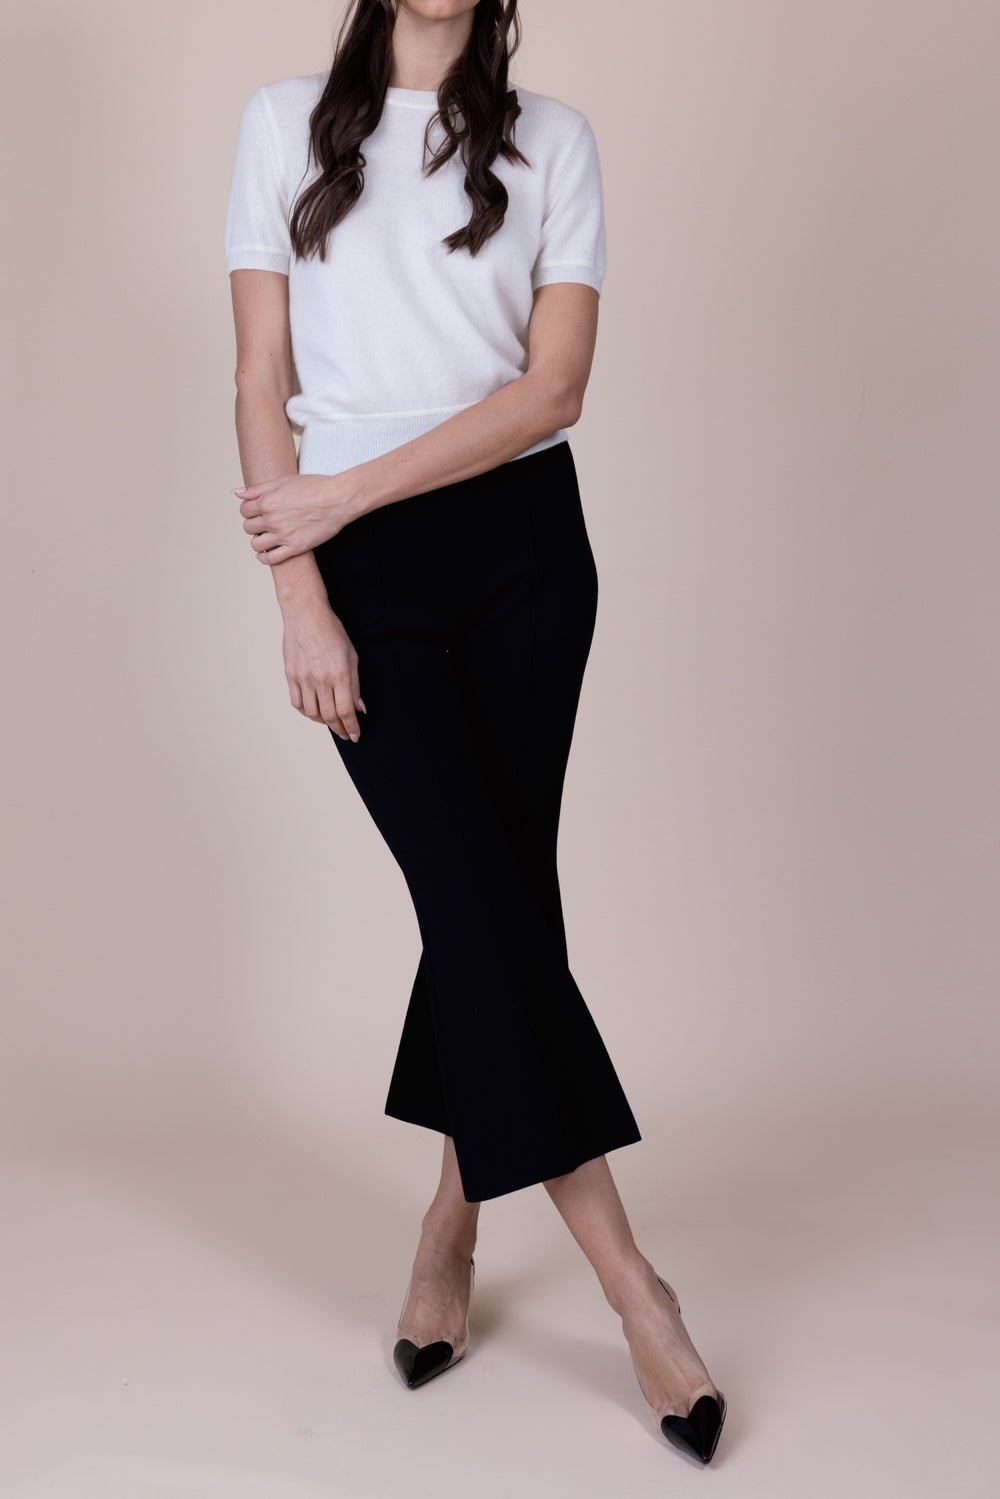 NAADAM-Short Sleeve Cropped Pullover - White-